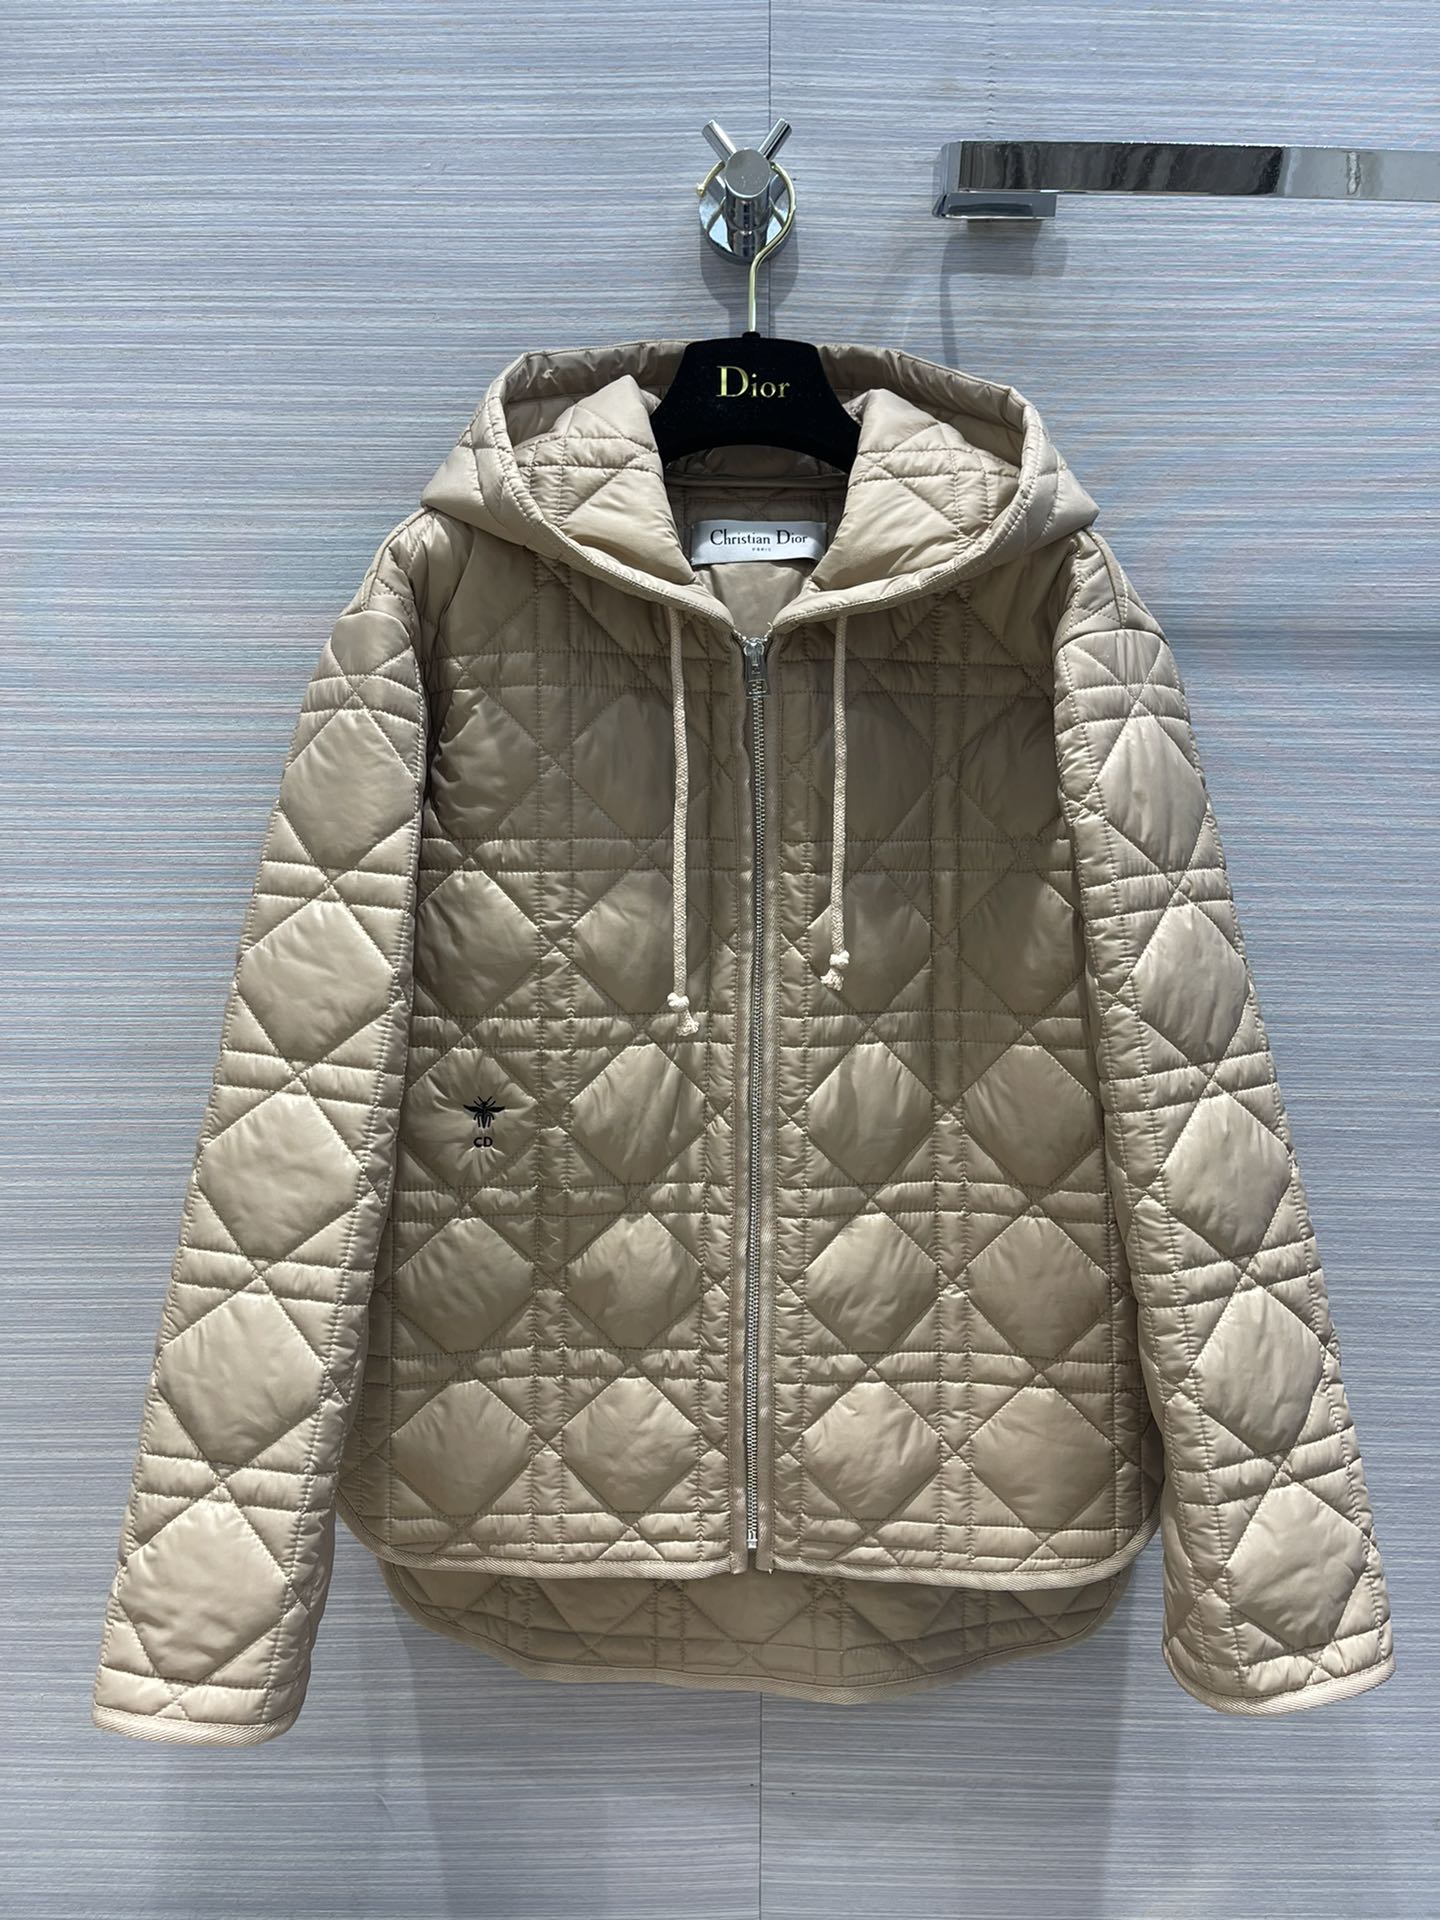 Dior Clothing Coats & Jackets Cotton Fall Collection Hooded Top